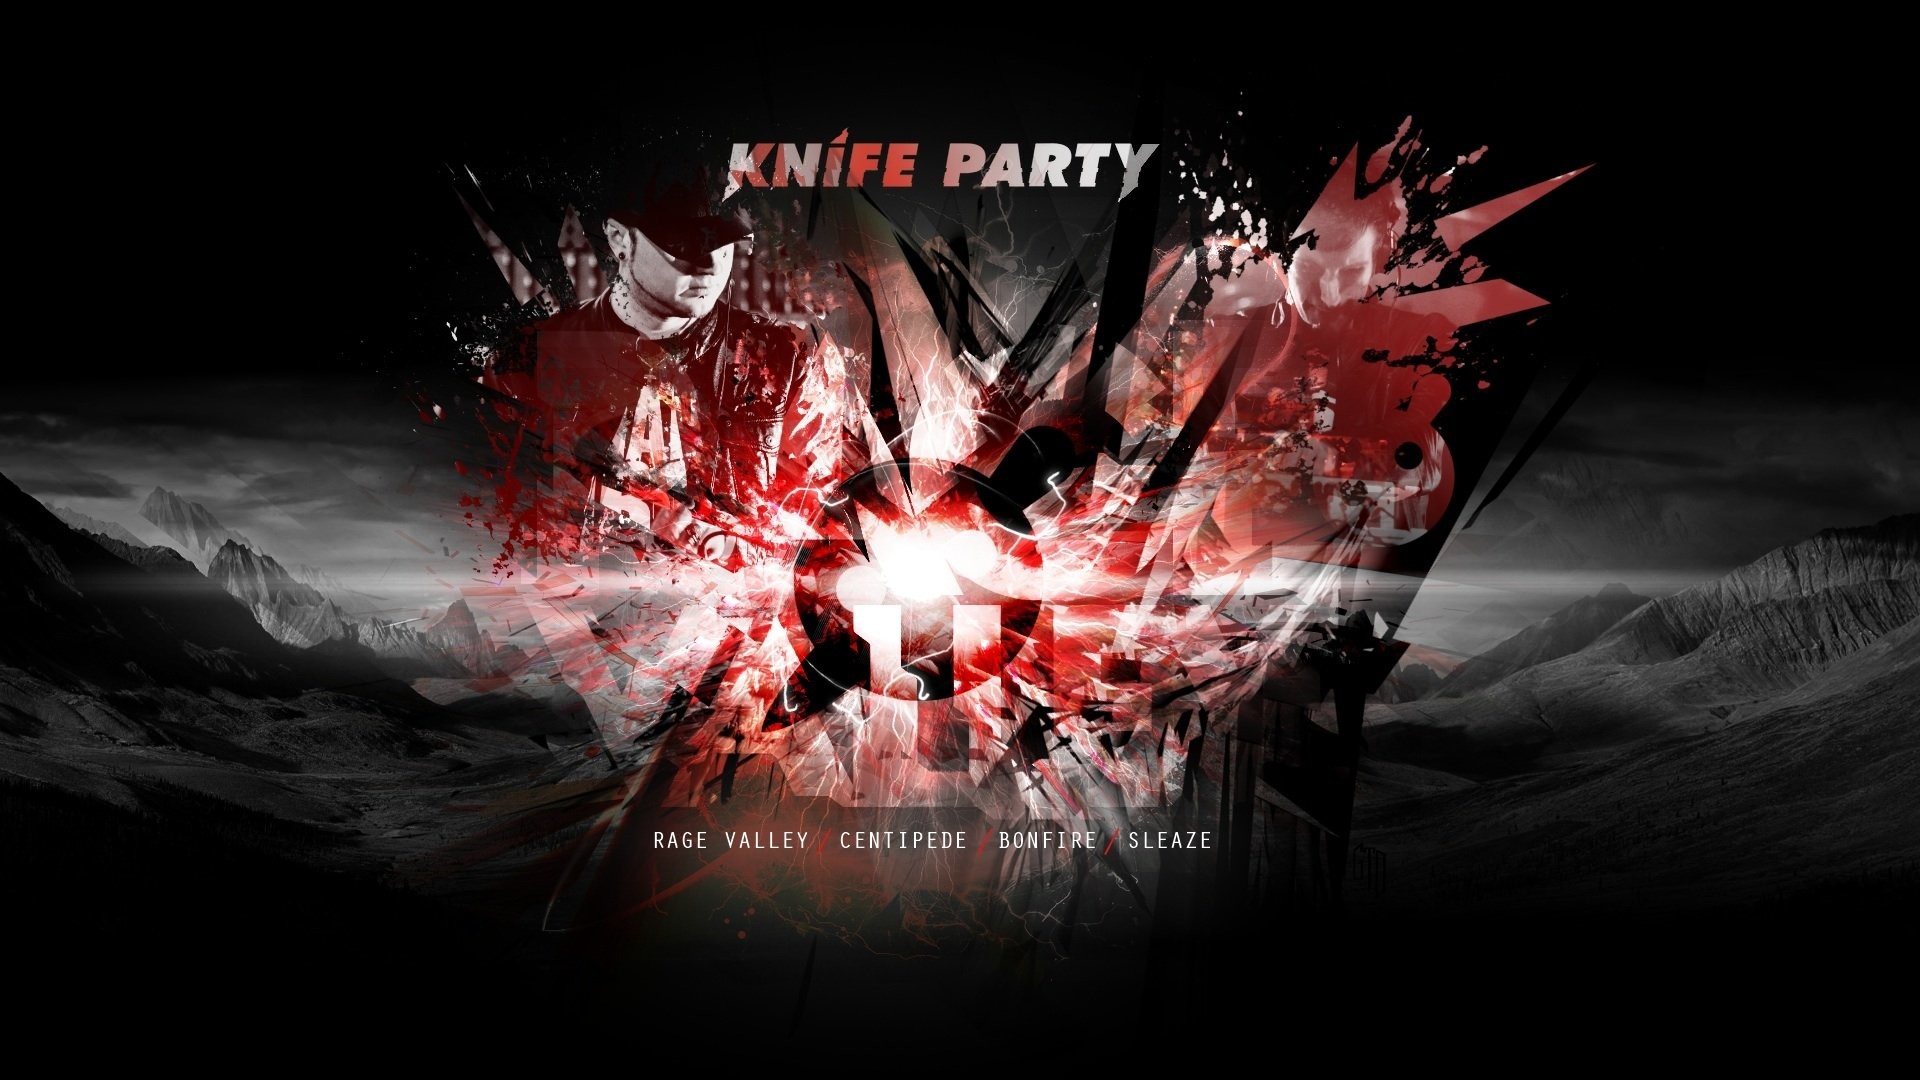 1920x1080 KNIFE PARTY electro house dub dubstep drum step dance electronic wallpaper  |  | 523021 | WallpaperUP